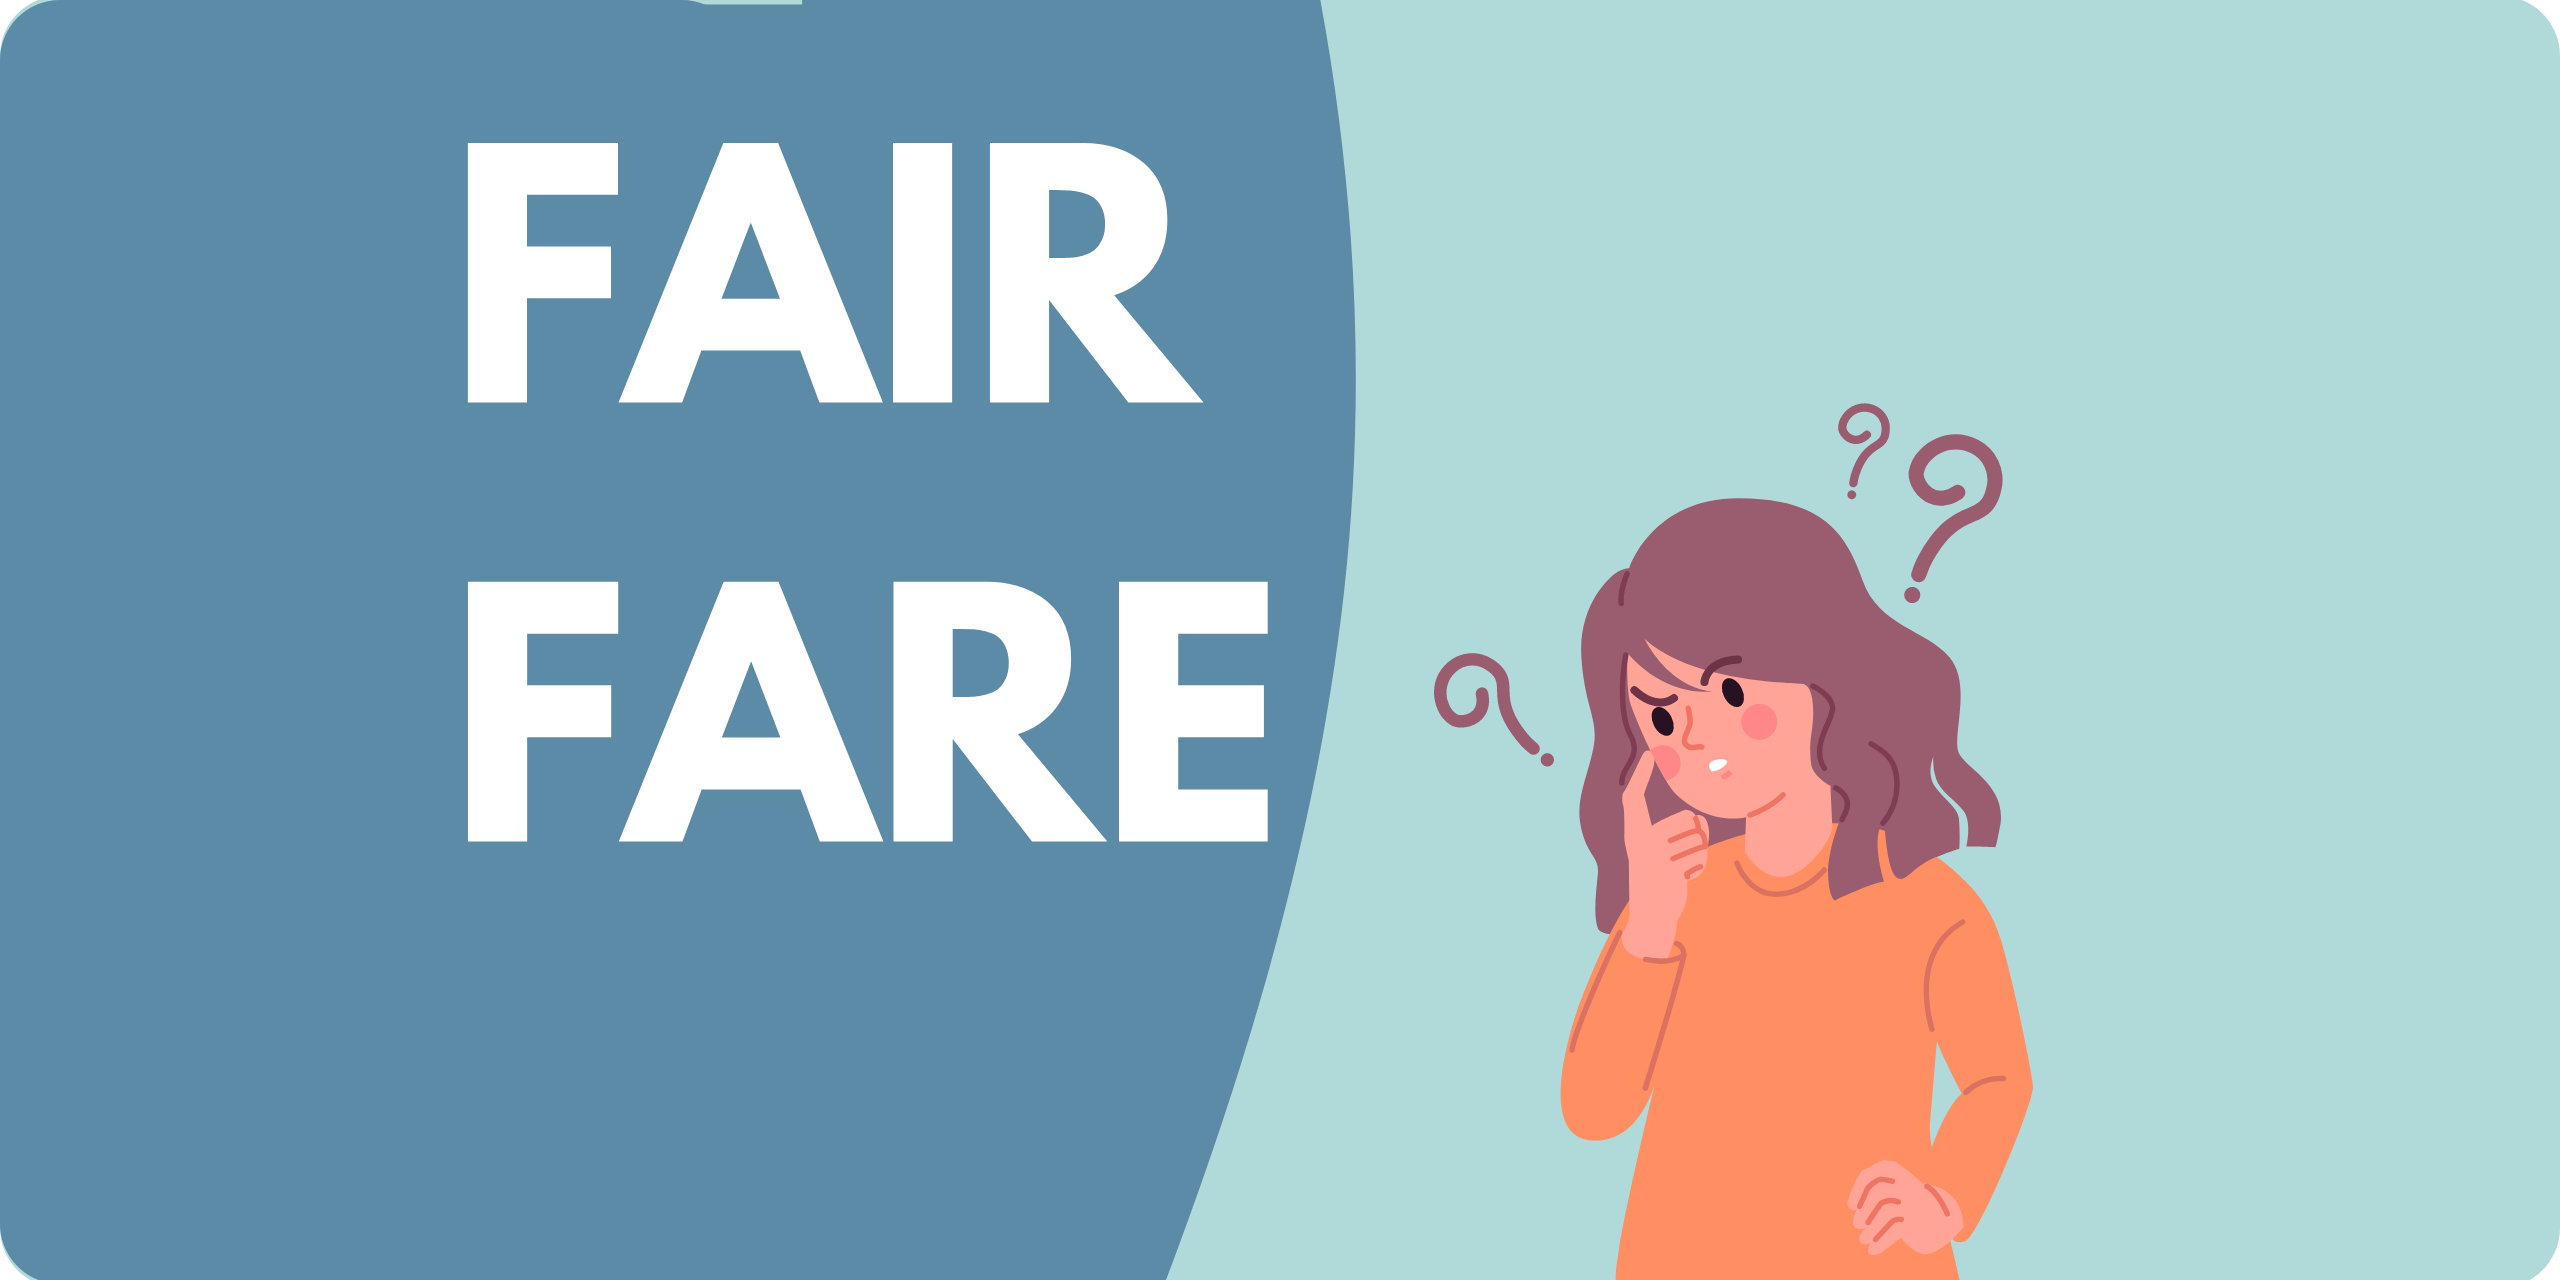 A graphic of a woman with a quizzical expression next to the words "Fair, Fare" to signify the confusion of the two words